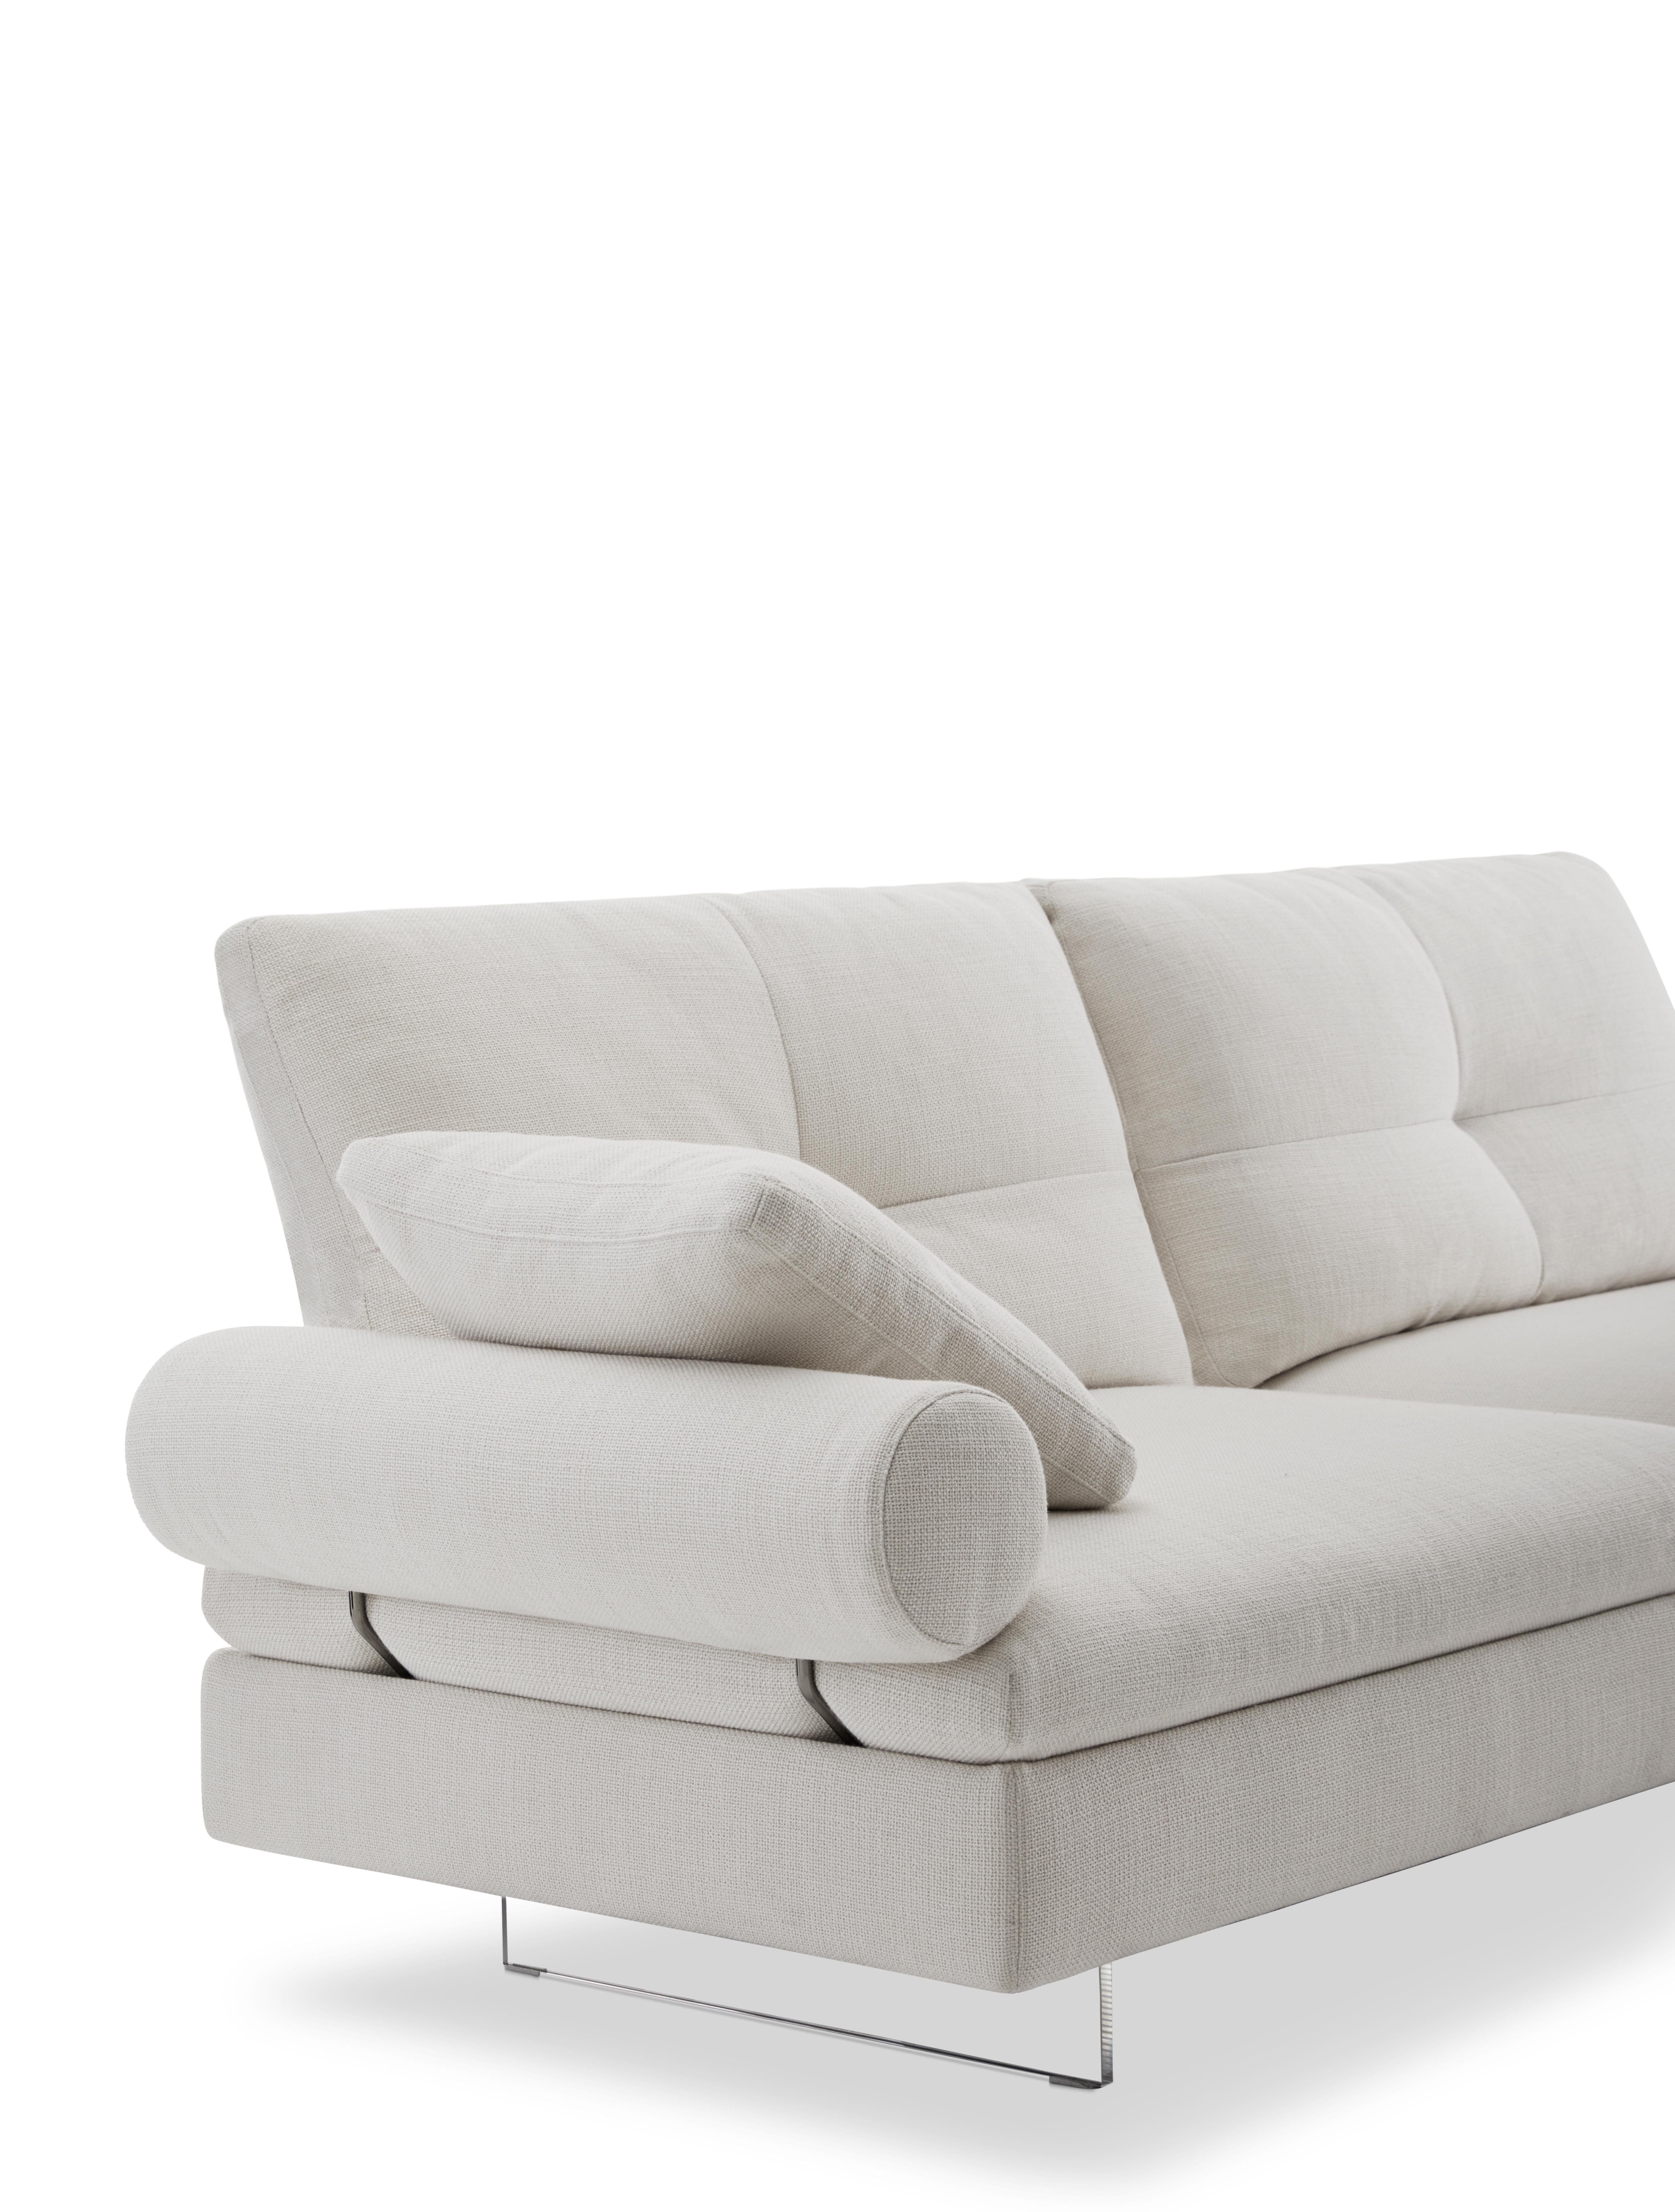 Modern Limes New 88 Large Sofa in Beige Upholstery with Roll Armrest by Sergio Bicego For Sale